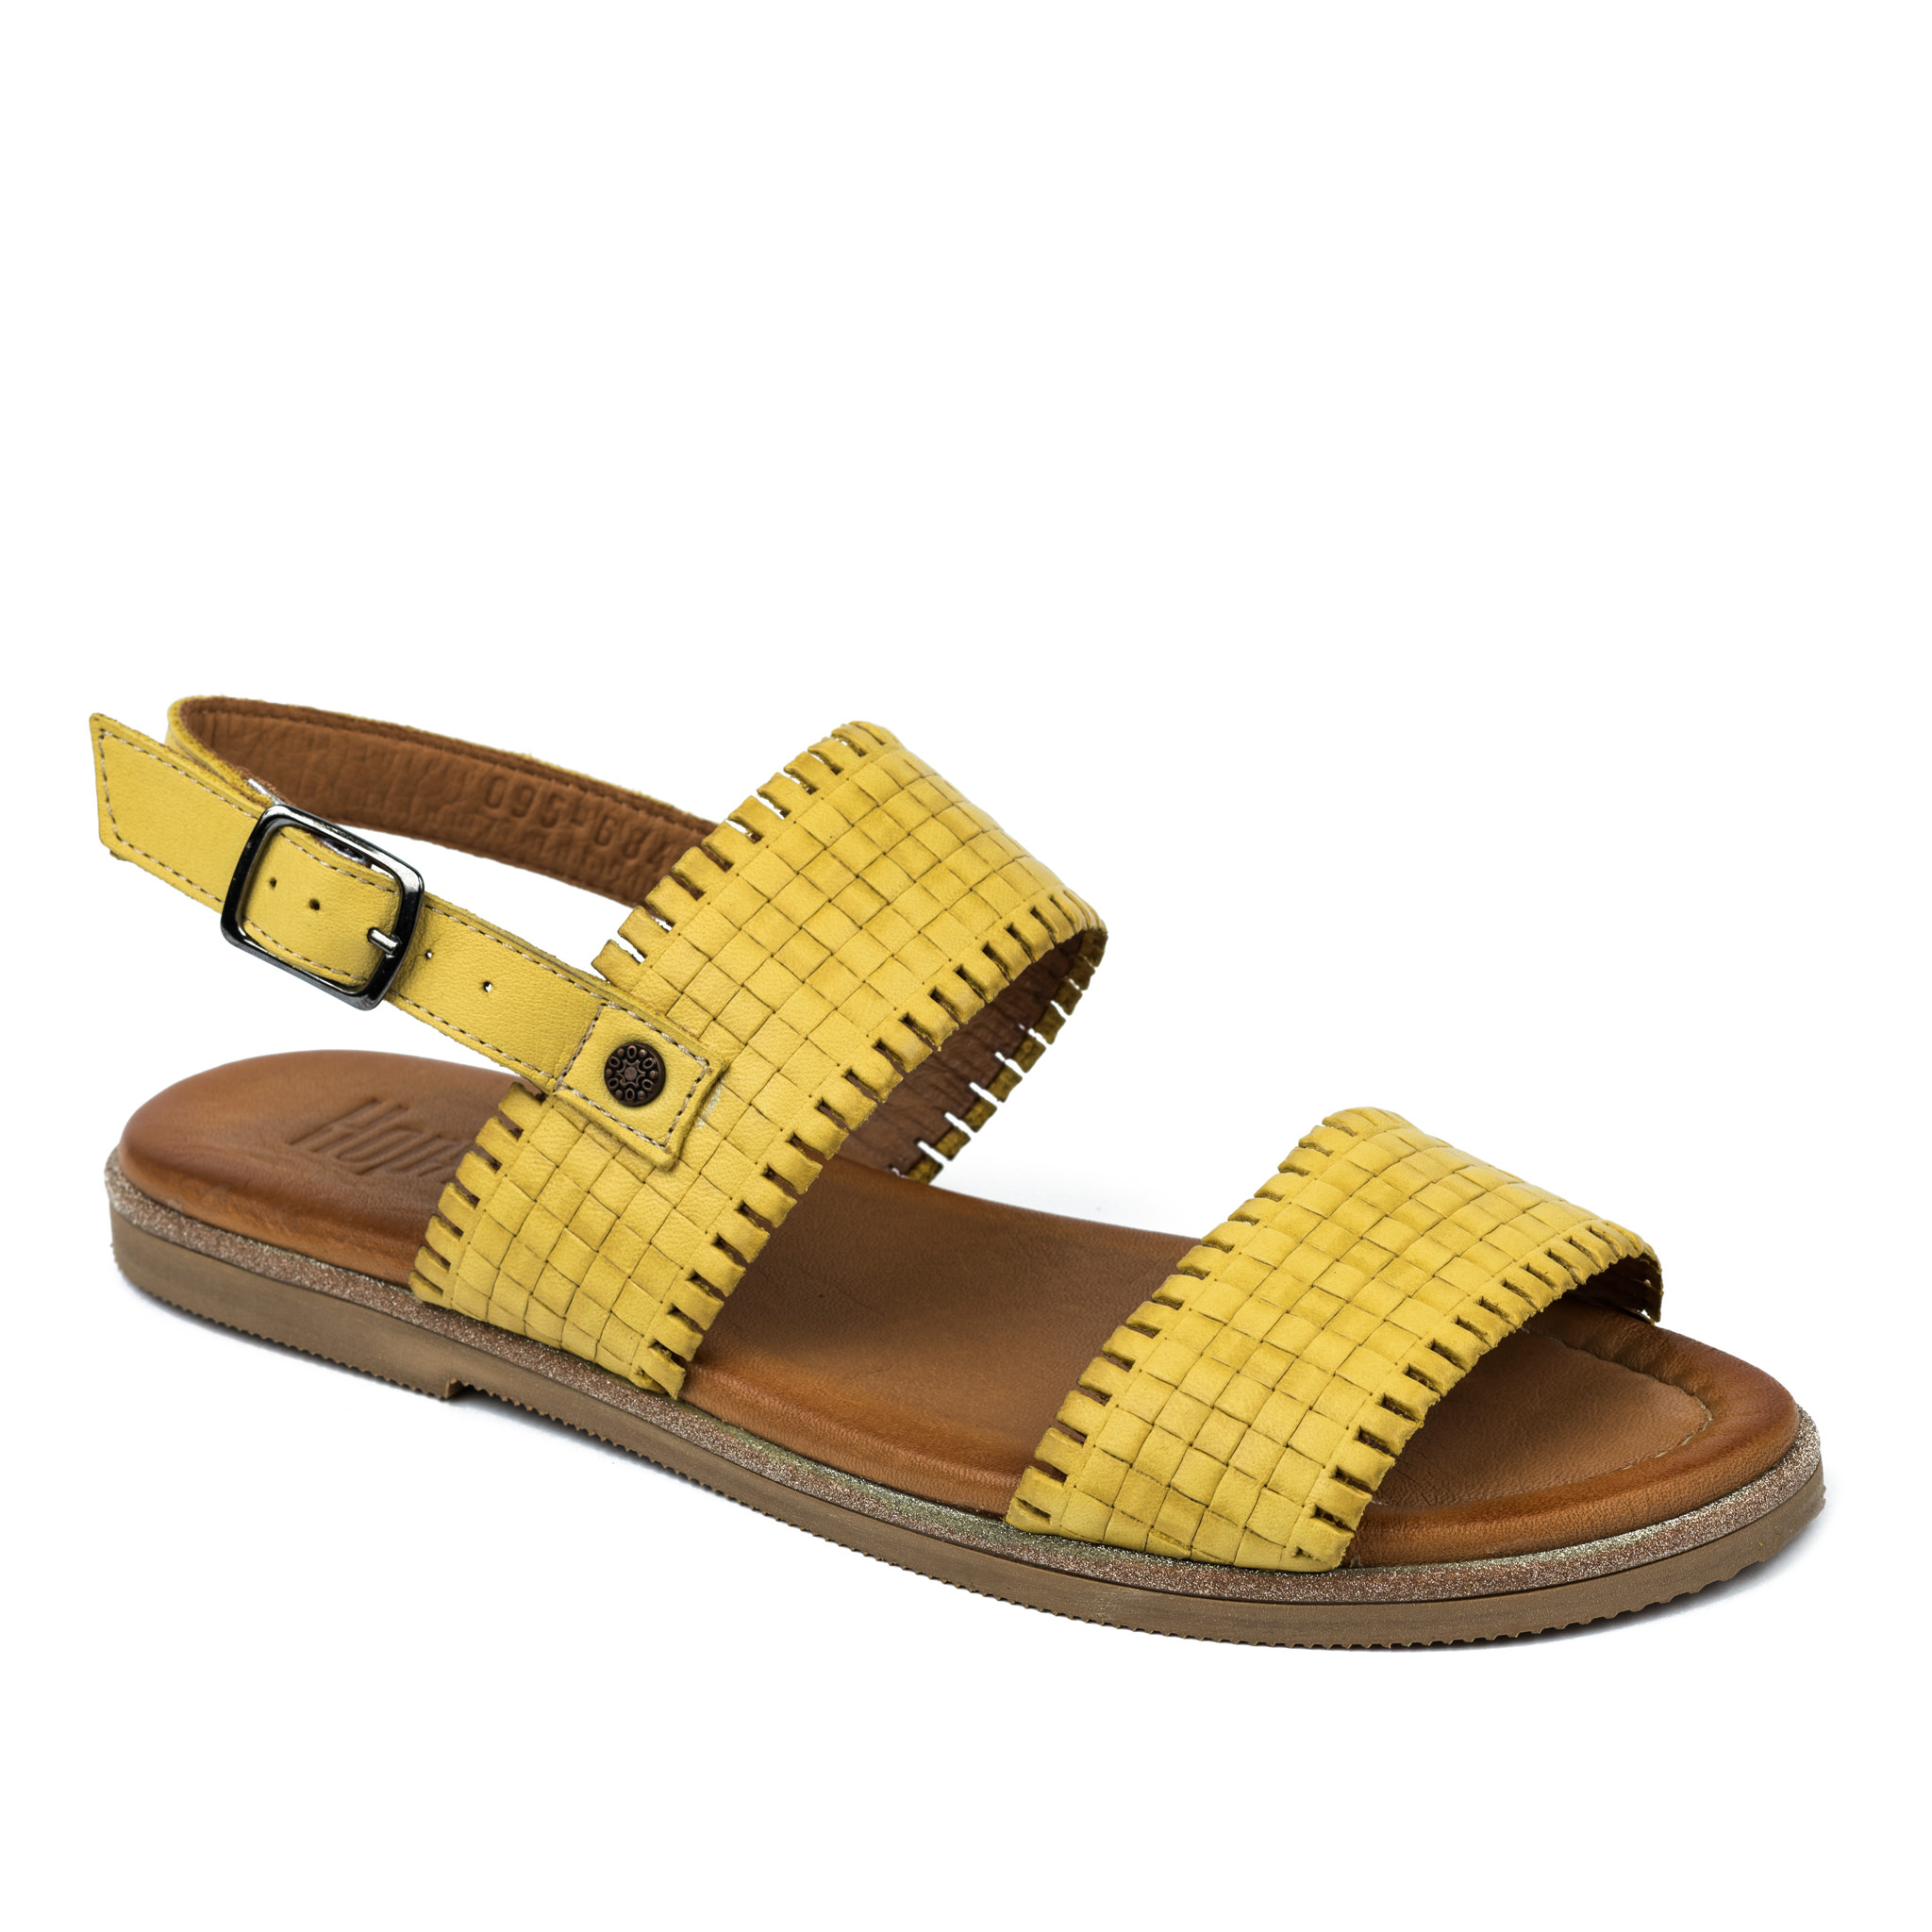 Leather sandals A684 - YELLOW